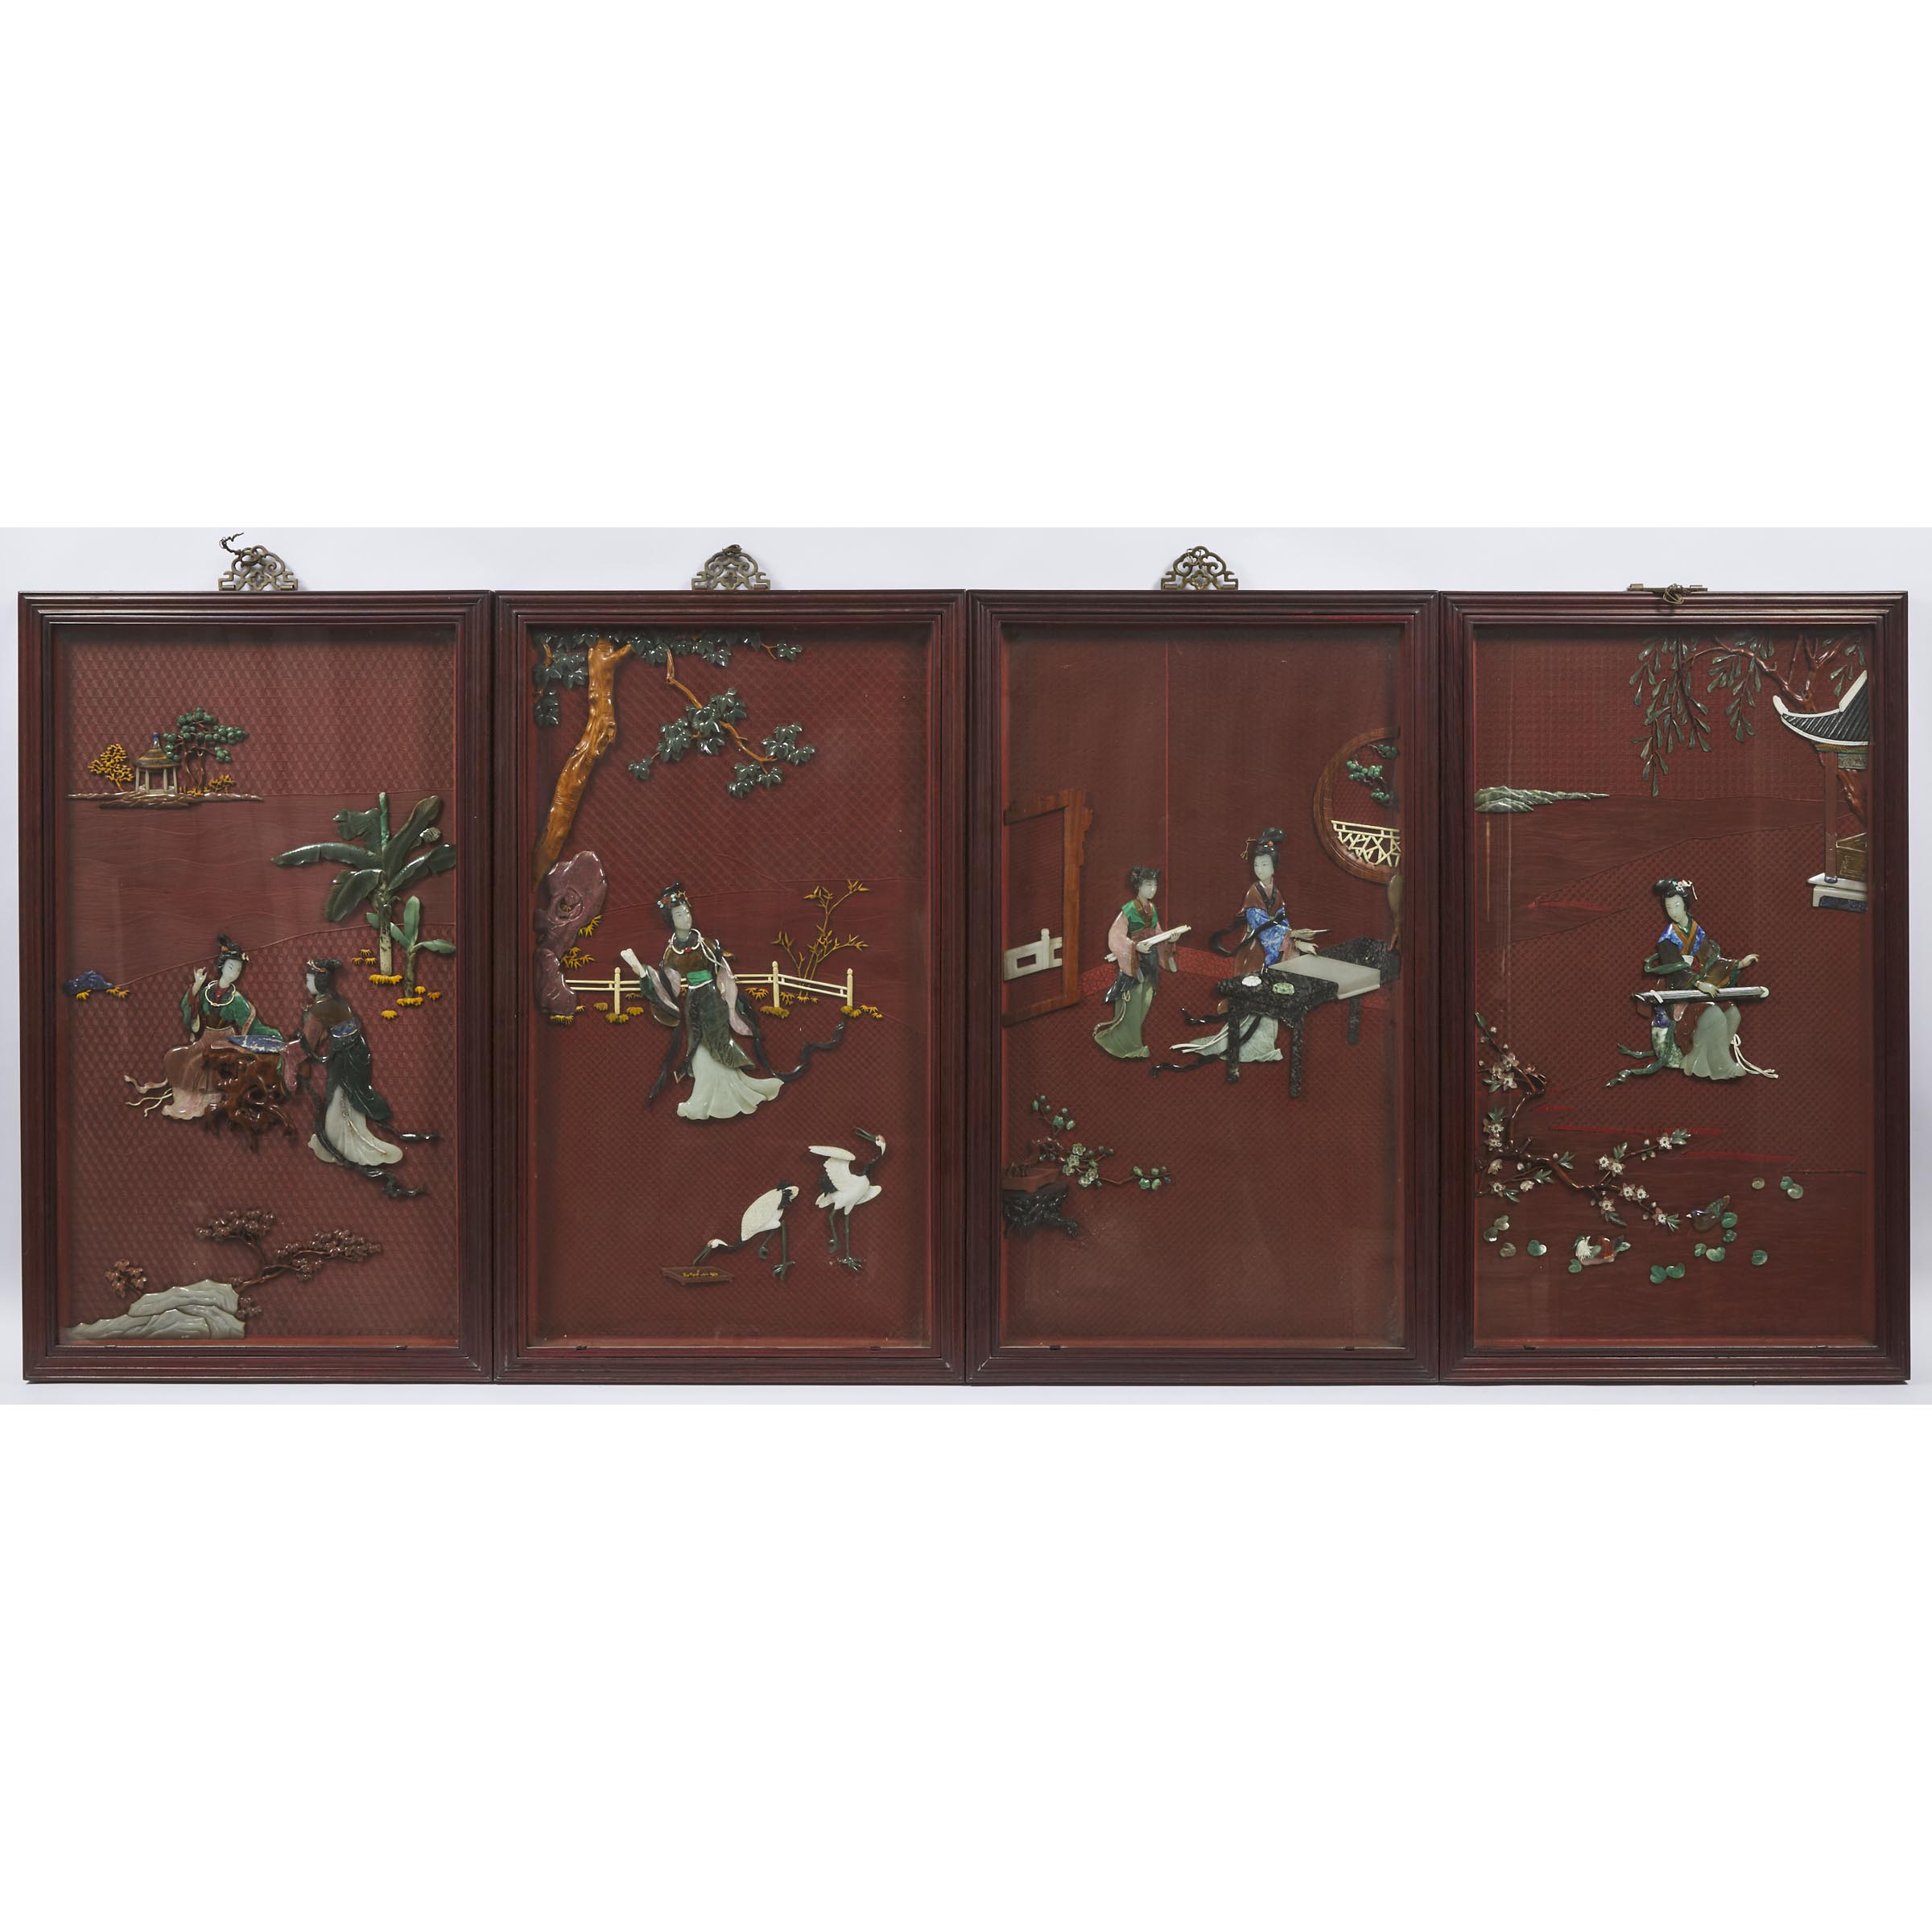 A Set of Four Jade-Inlaid Cinnabar Lacquer-Ground 'Four Noble Pursuits' Panels, Republican Period (1912-1949)